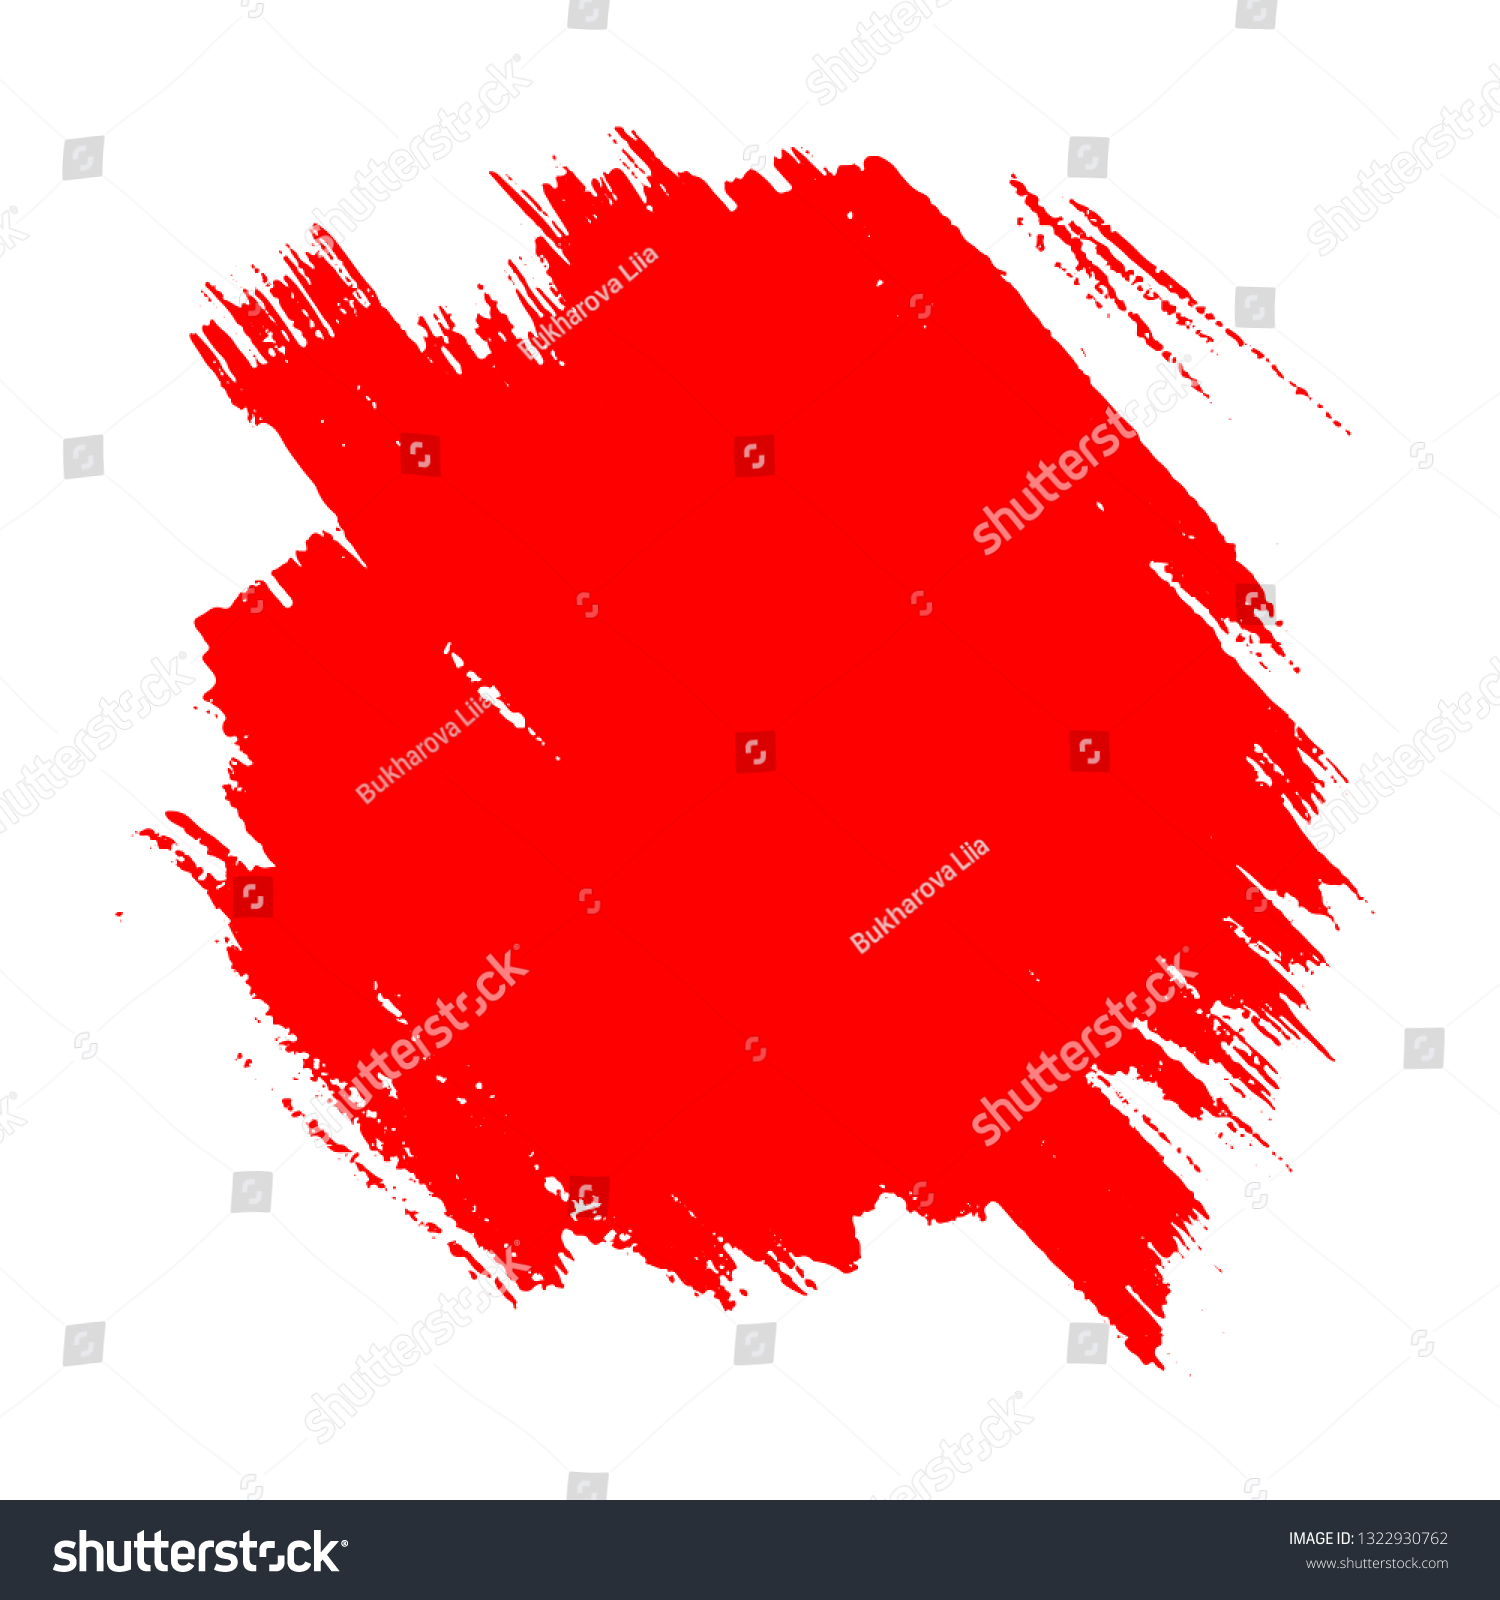 Brush painted grunge red spot isolated on white background, vector illustration #1322930762